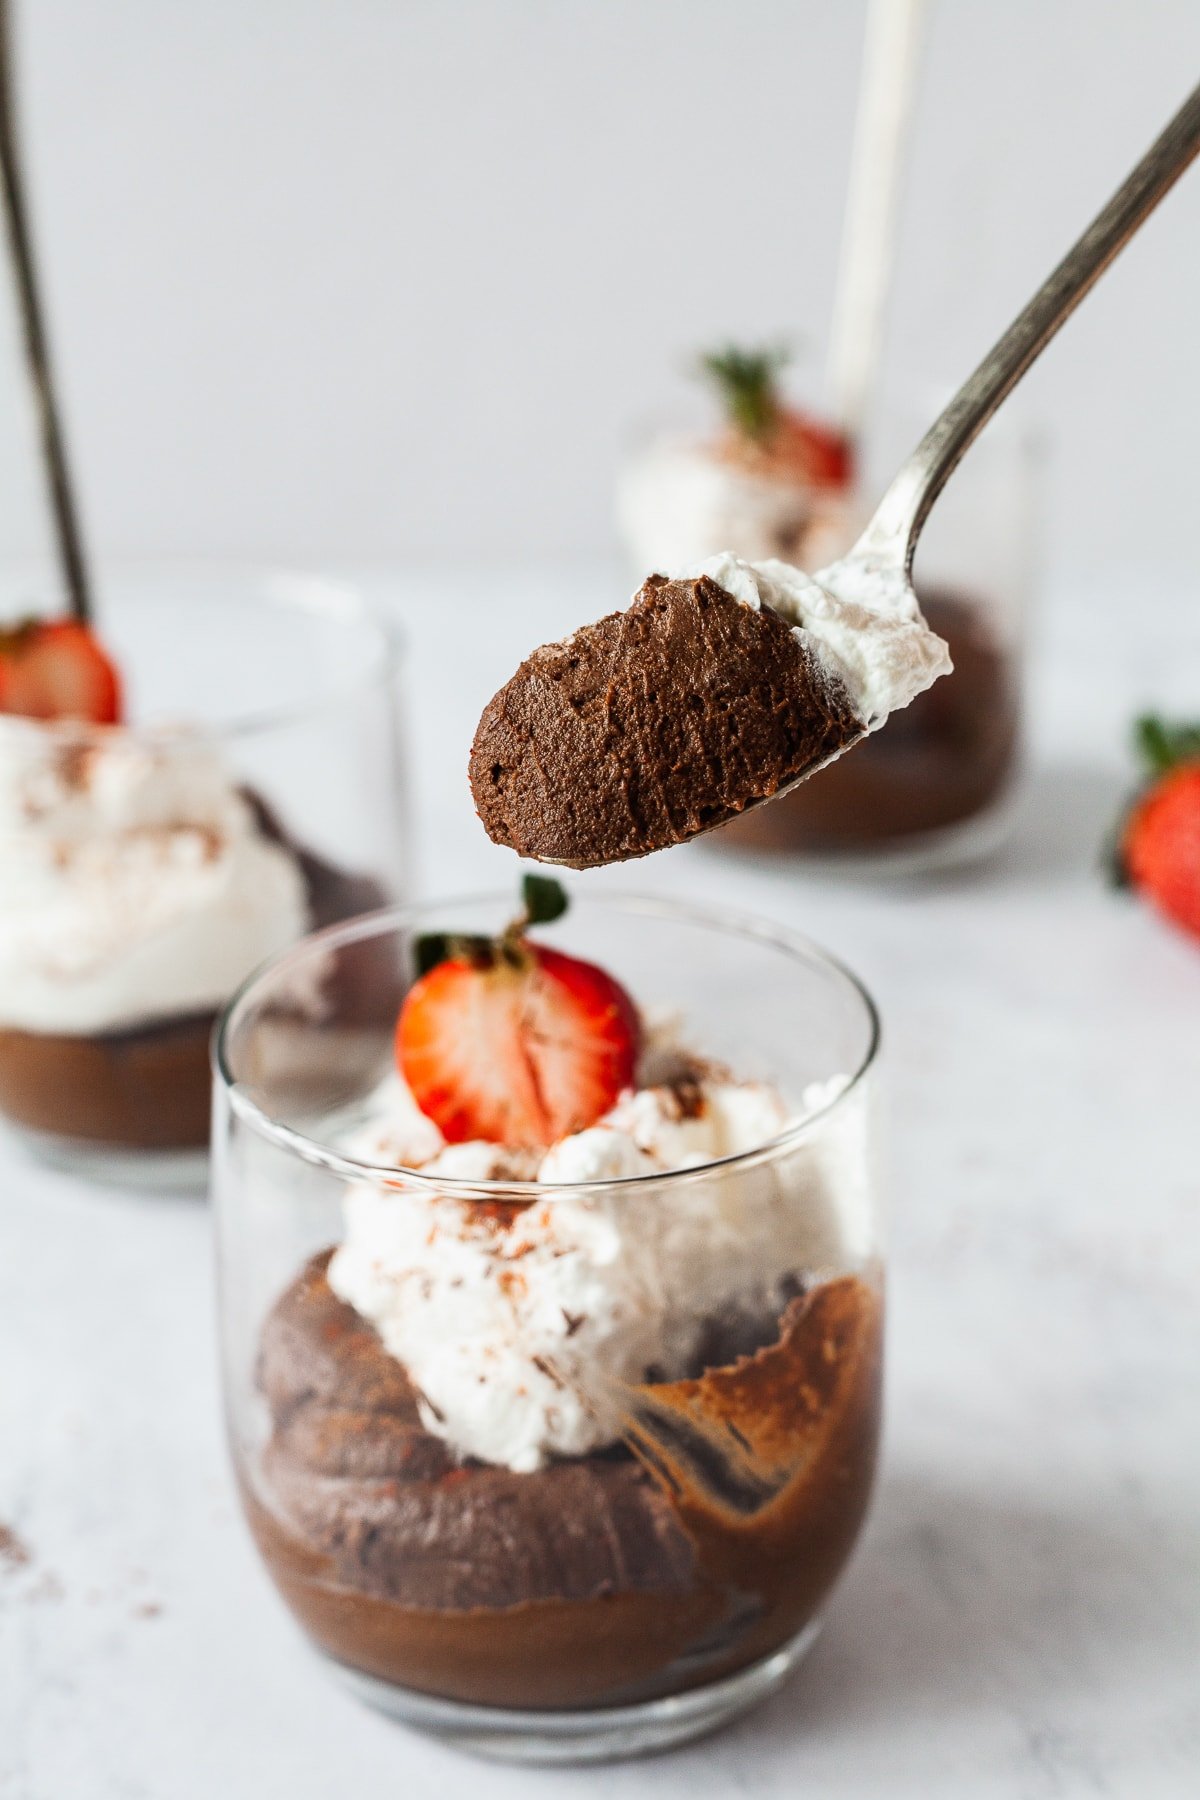 A spoon filled with a scoop of avocado chocolate mousse.